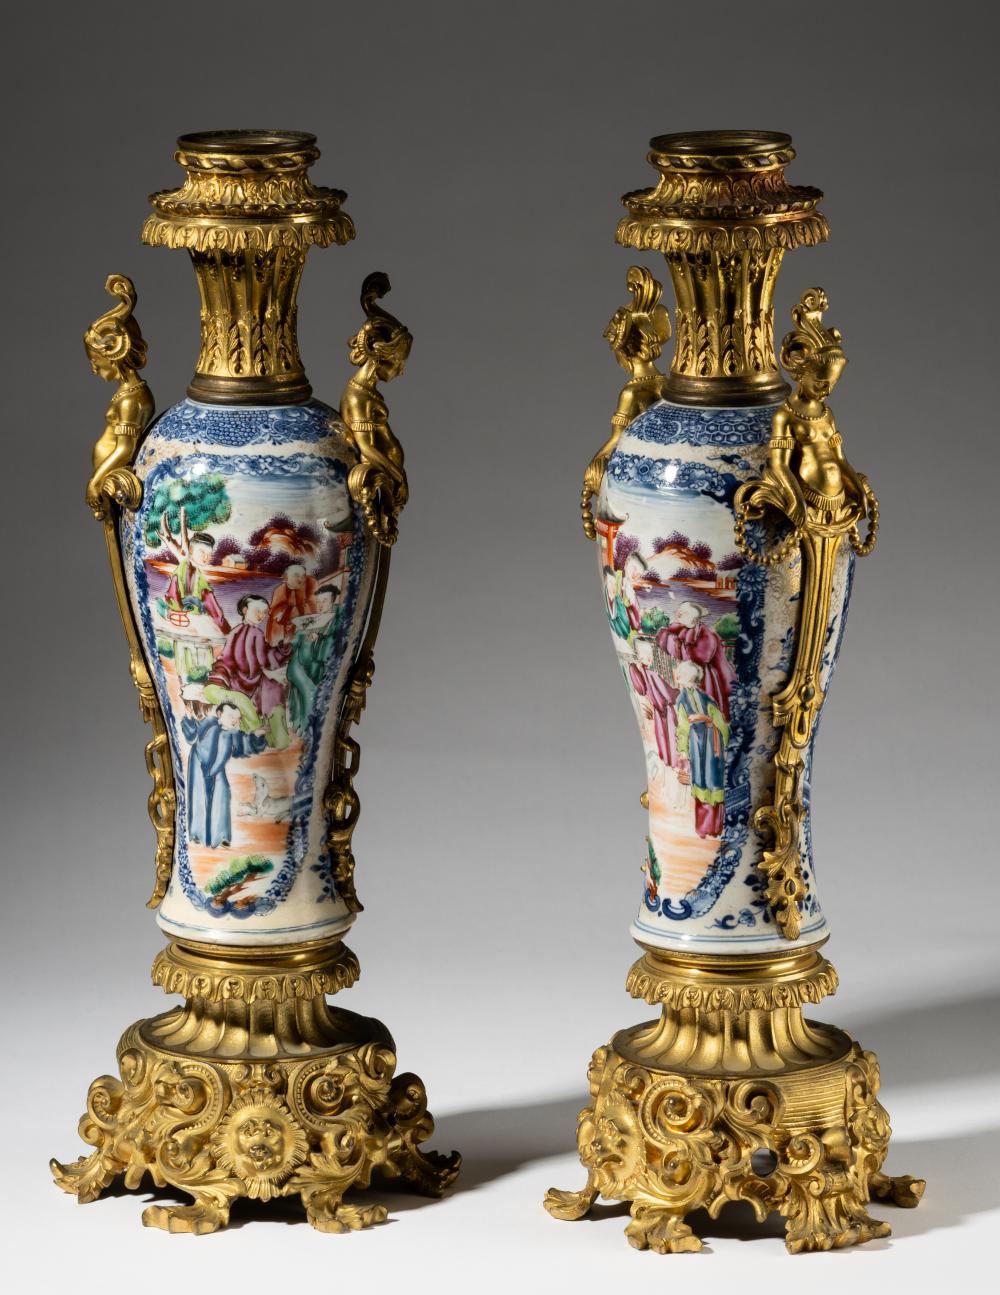 PAIR OF GILT BRONZE-MOUNTED CHINESE